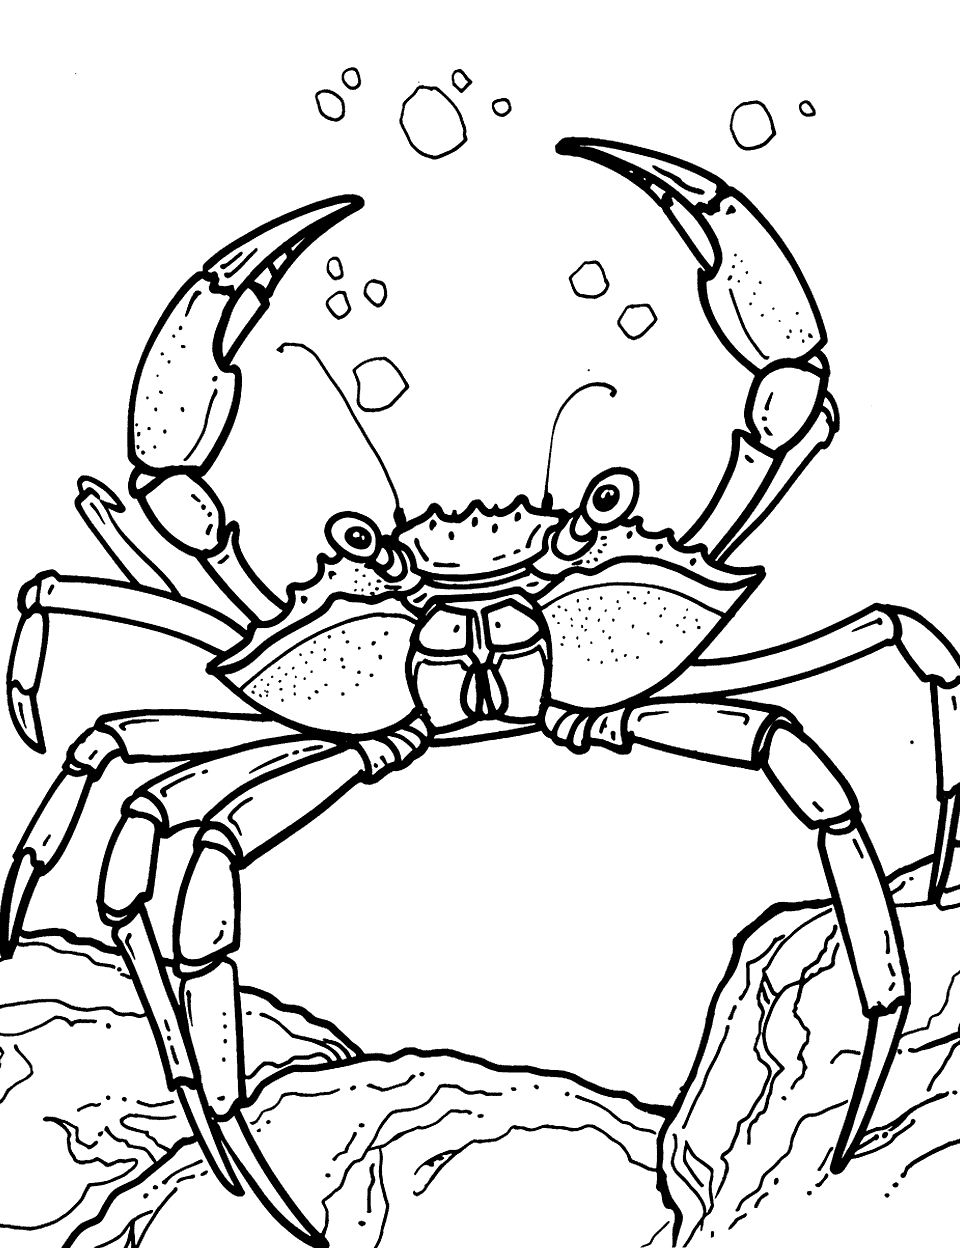 Spider Crab Exploration Coloring Page - A big spider crab with long legs wandering around the rocky ocean floor.